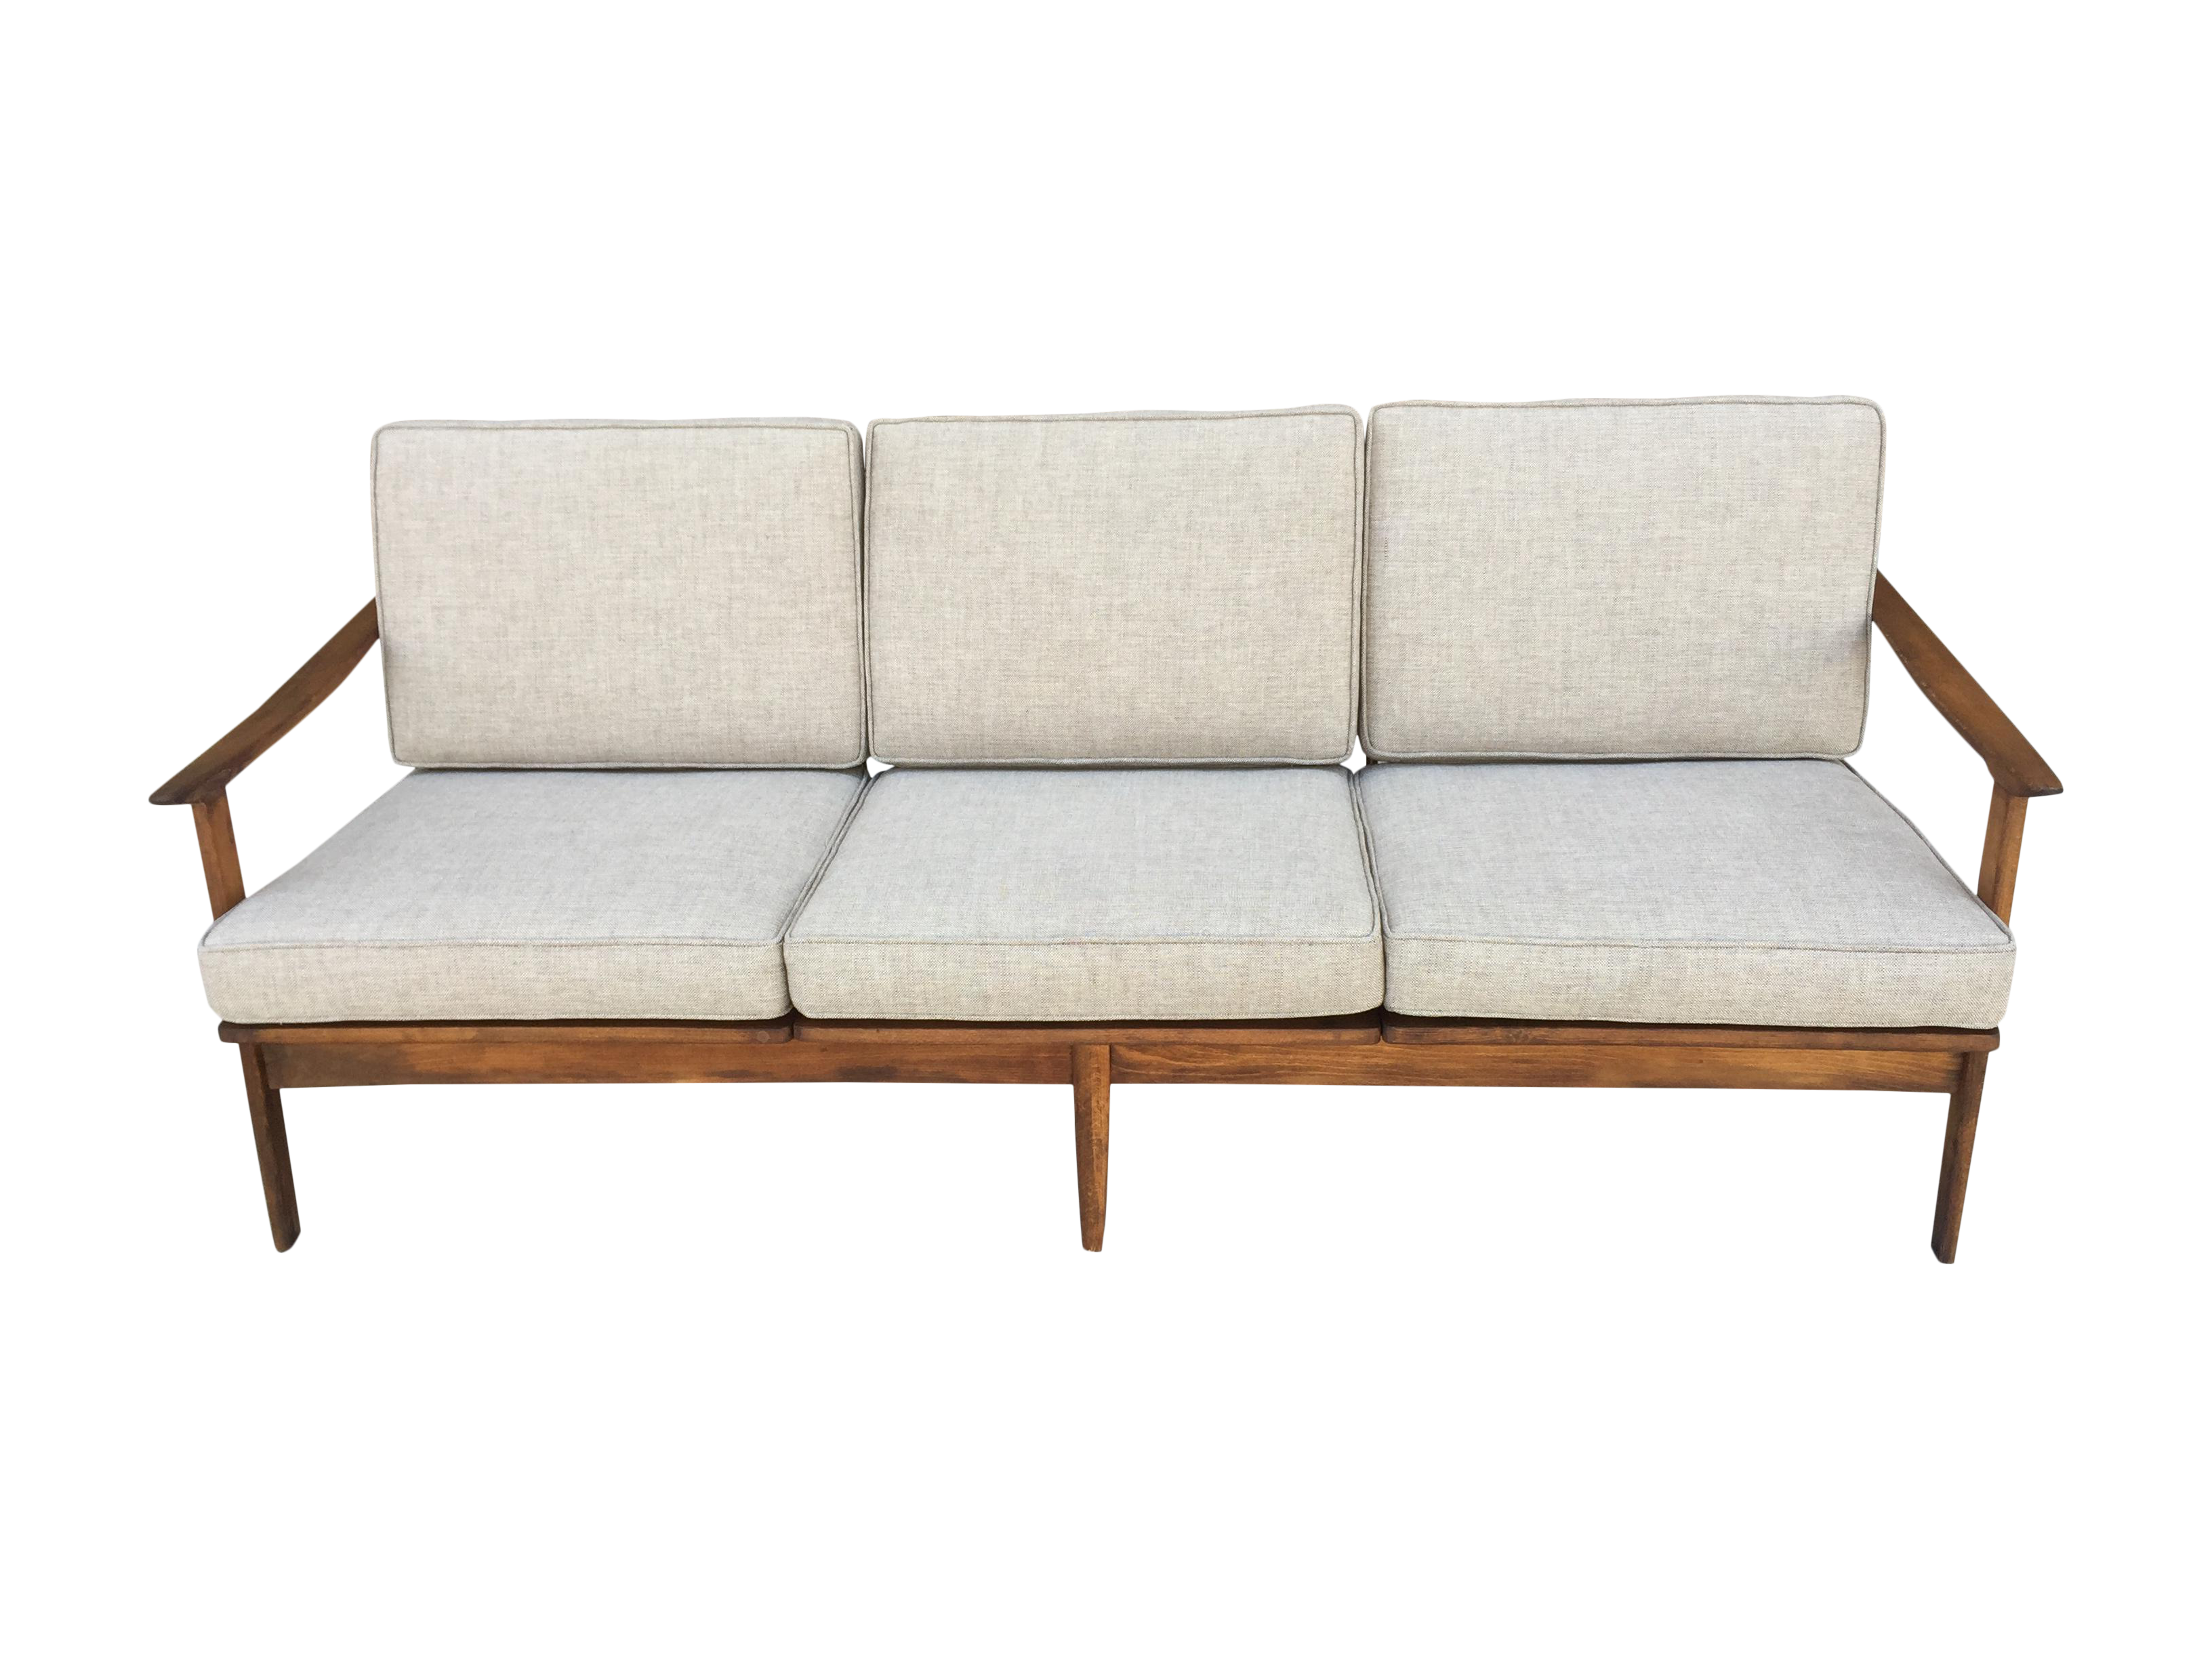 Mid Century Modern Three Seater Sofa On Chairish Outdoor Sofa Pertaining To Mid Century 3 Seat Couches (View 5 of 20)